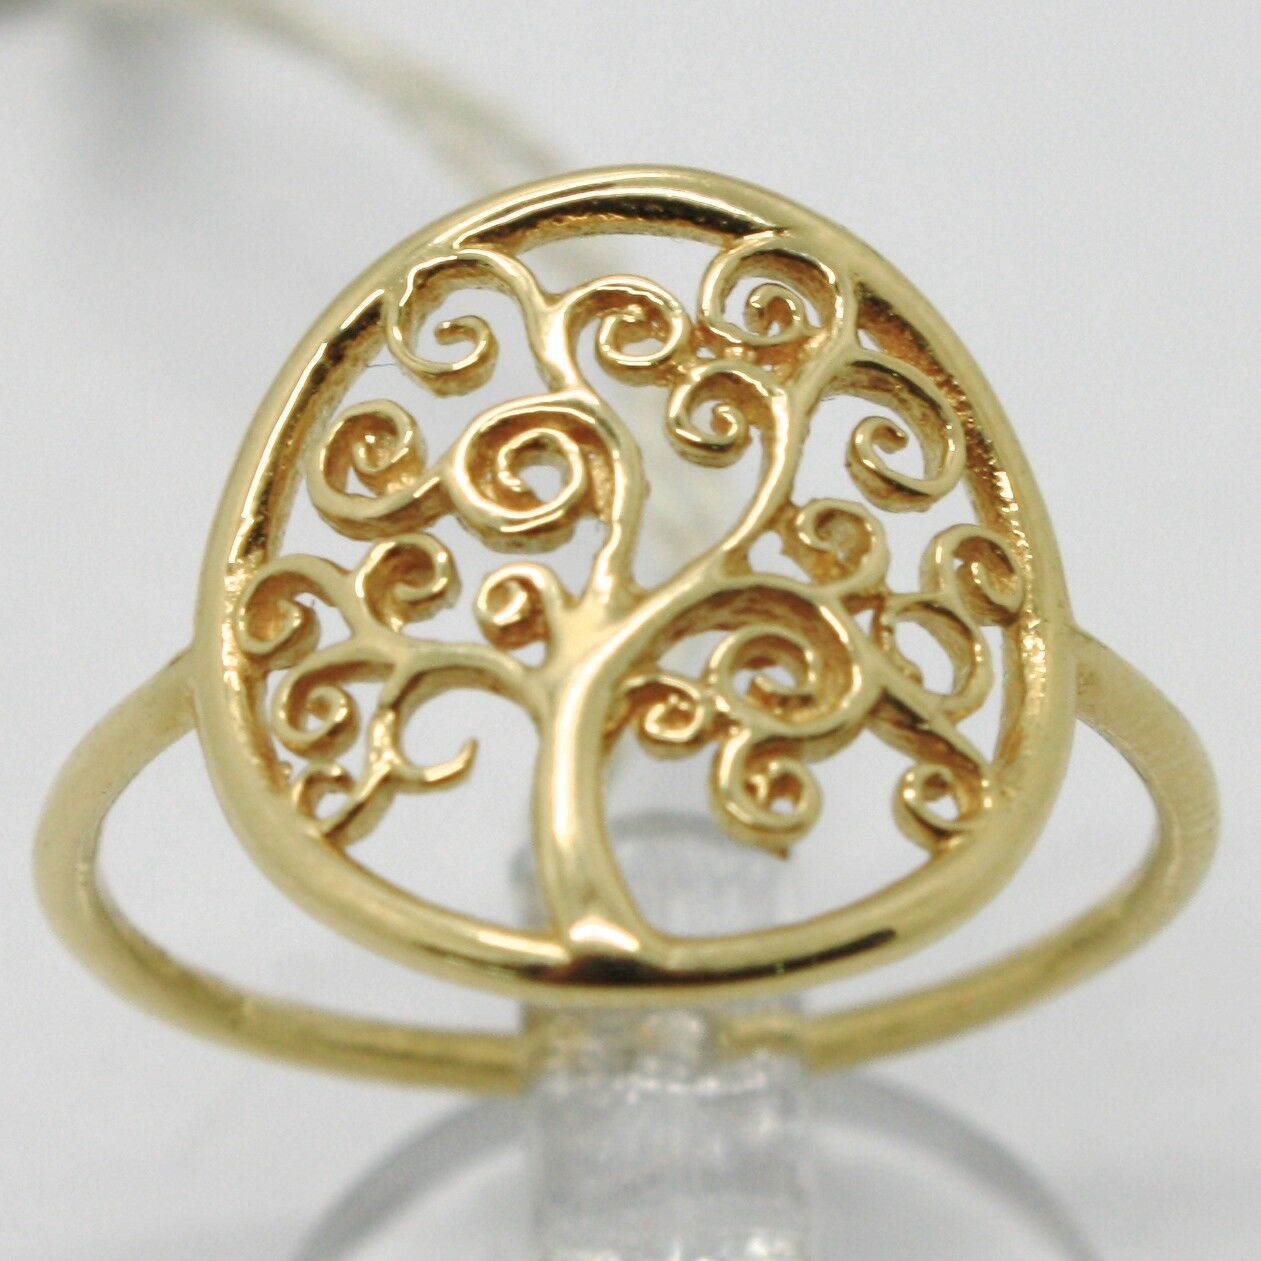 Primary image for 18K YELLOW GOLD TREE OF LIFE RING, SMOOTH, BRIGHT, LUMINOUS, MADE IN ITALY